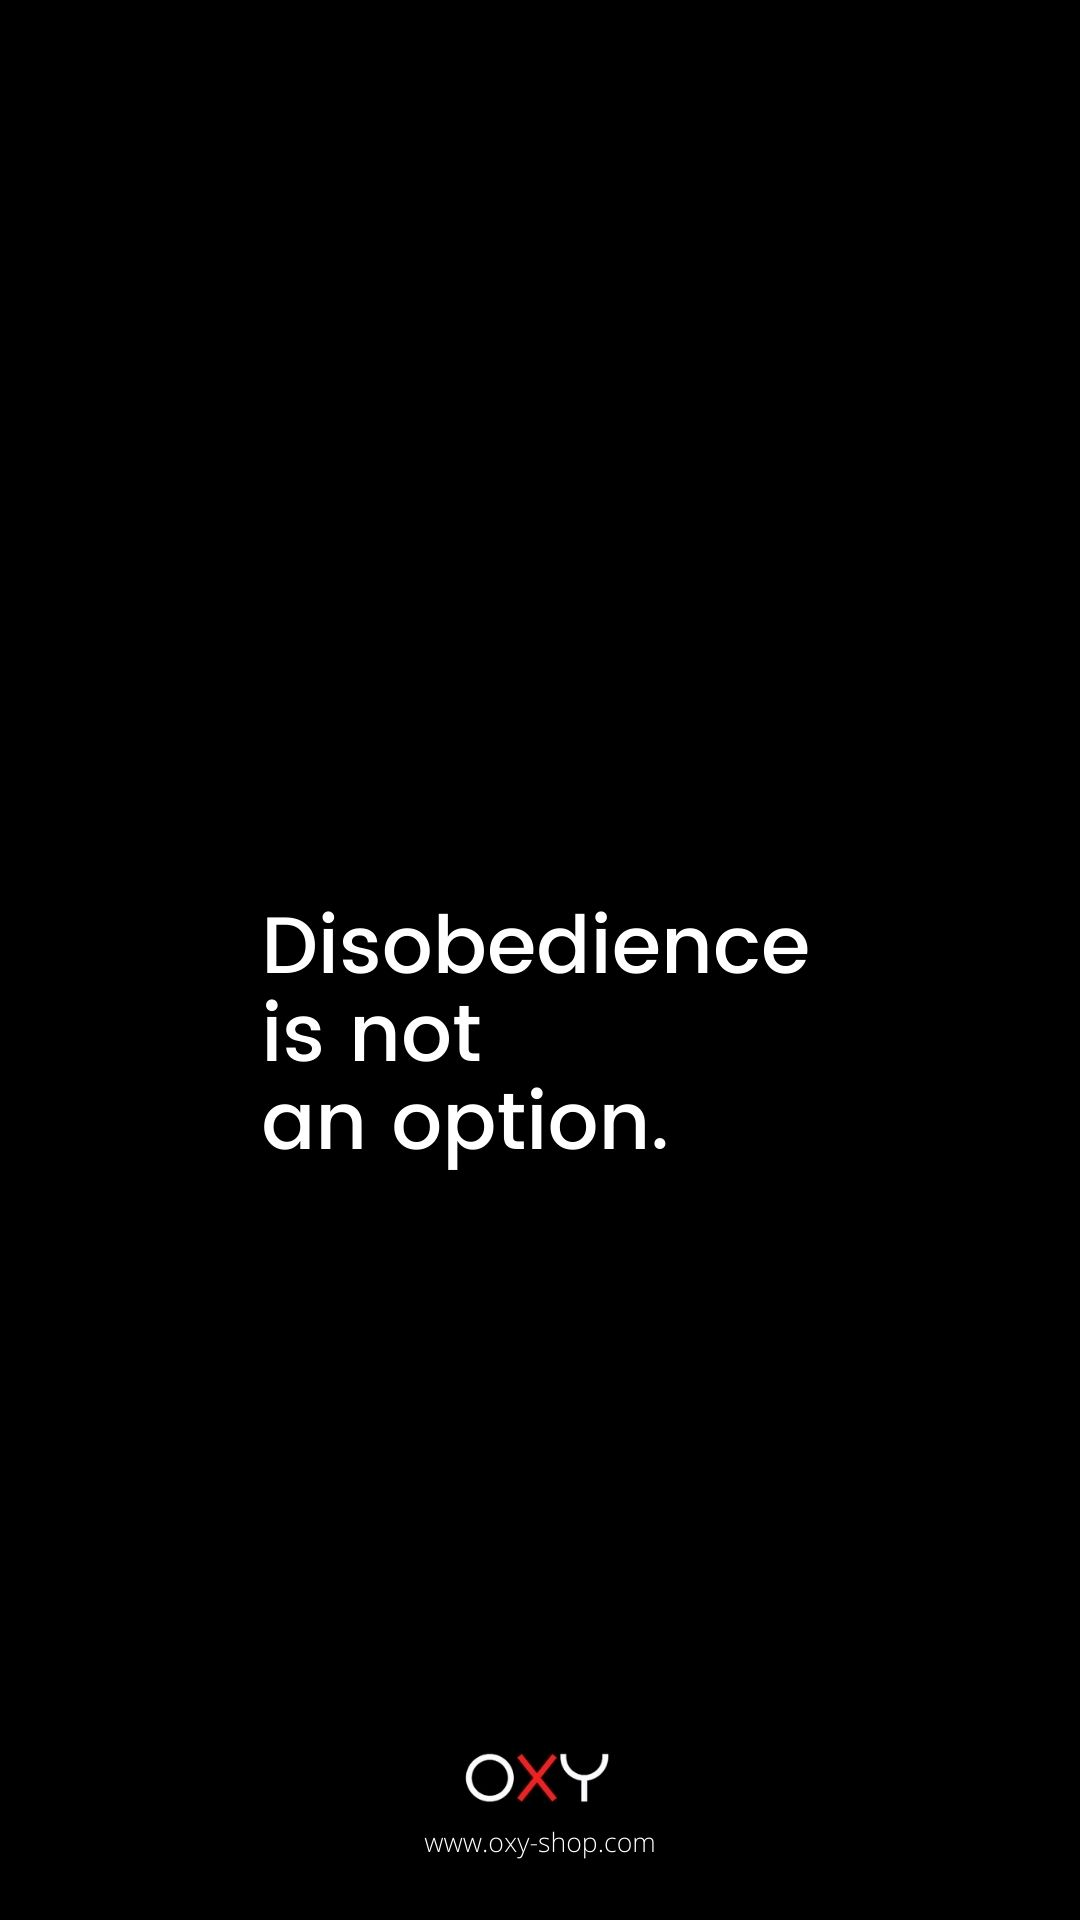 Disobedience is not an option. - BDSM wallpaper